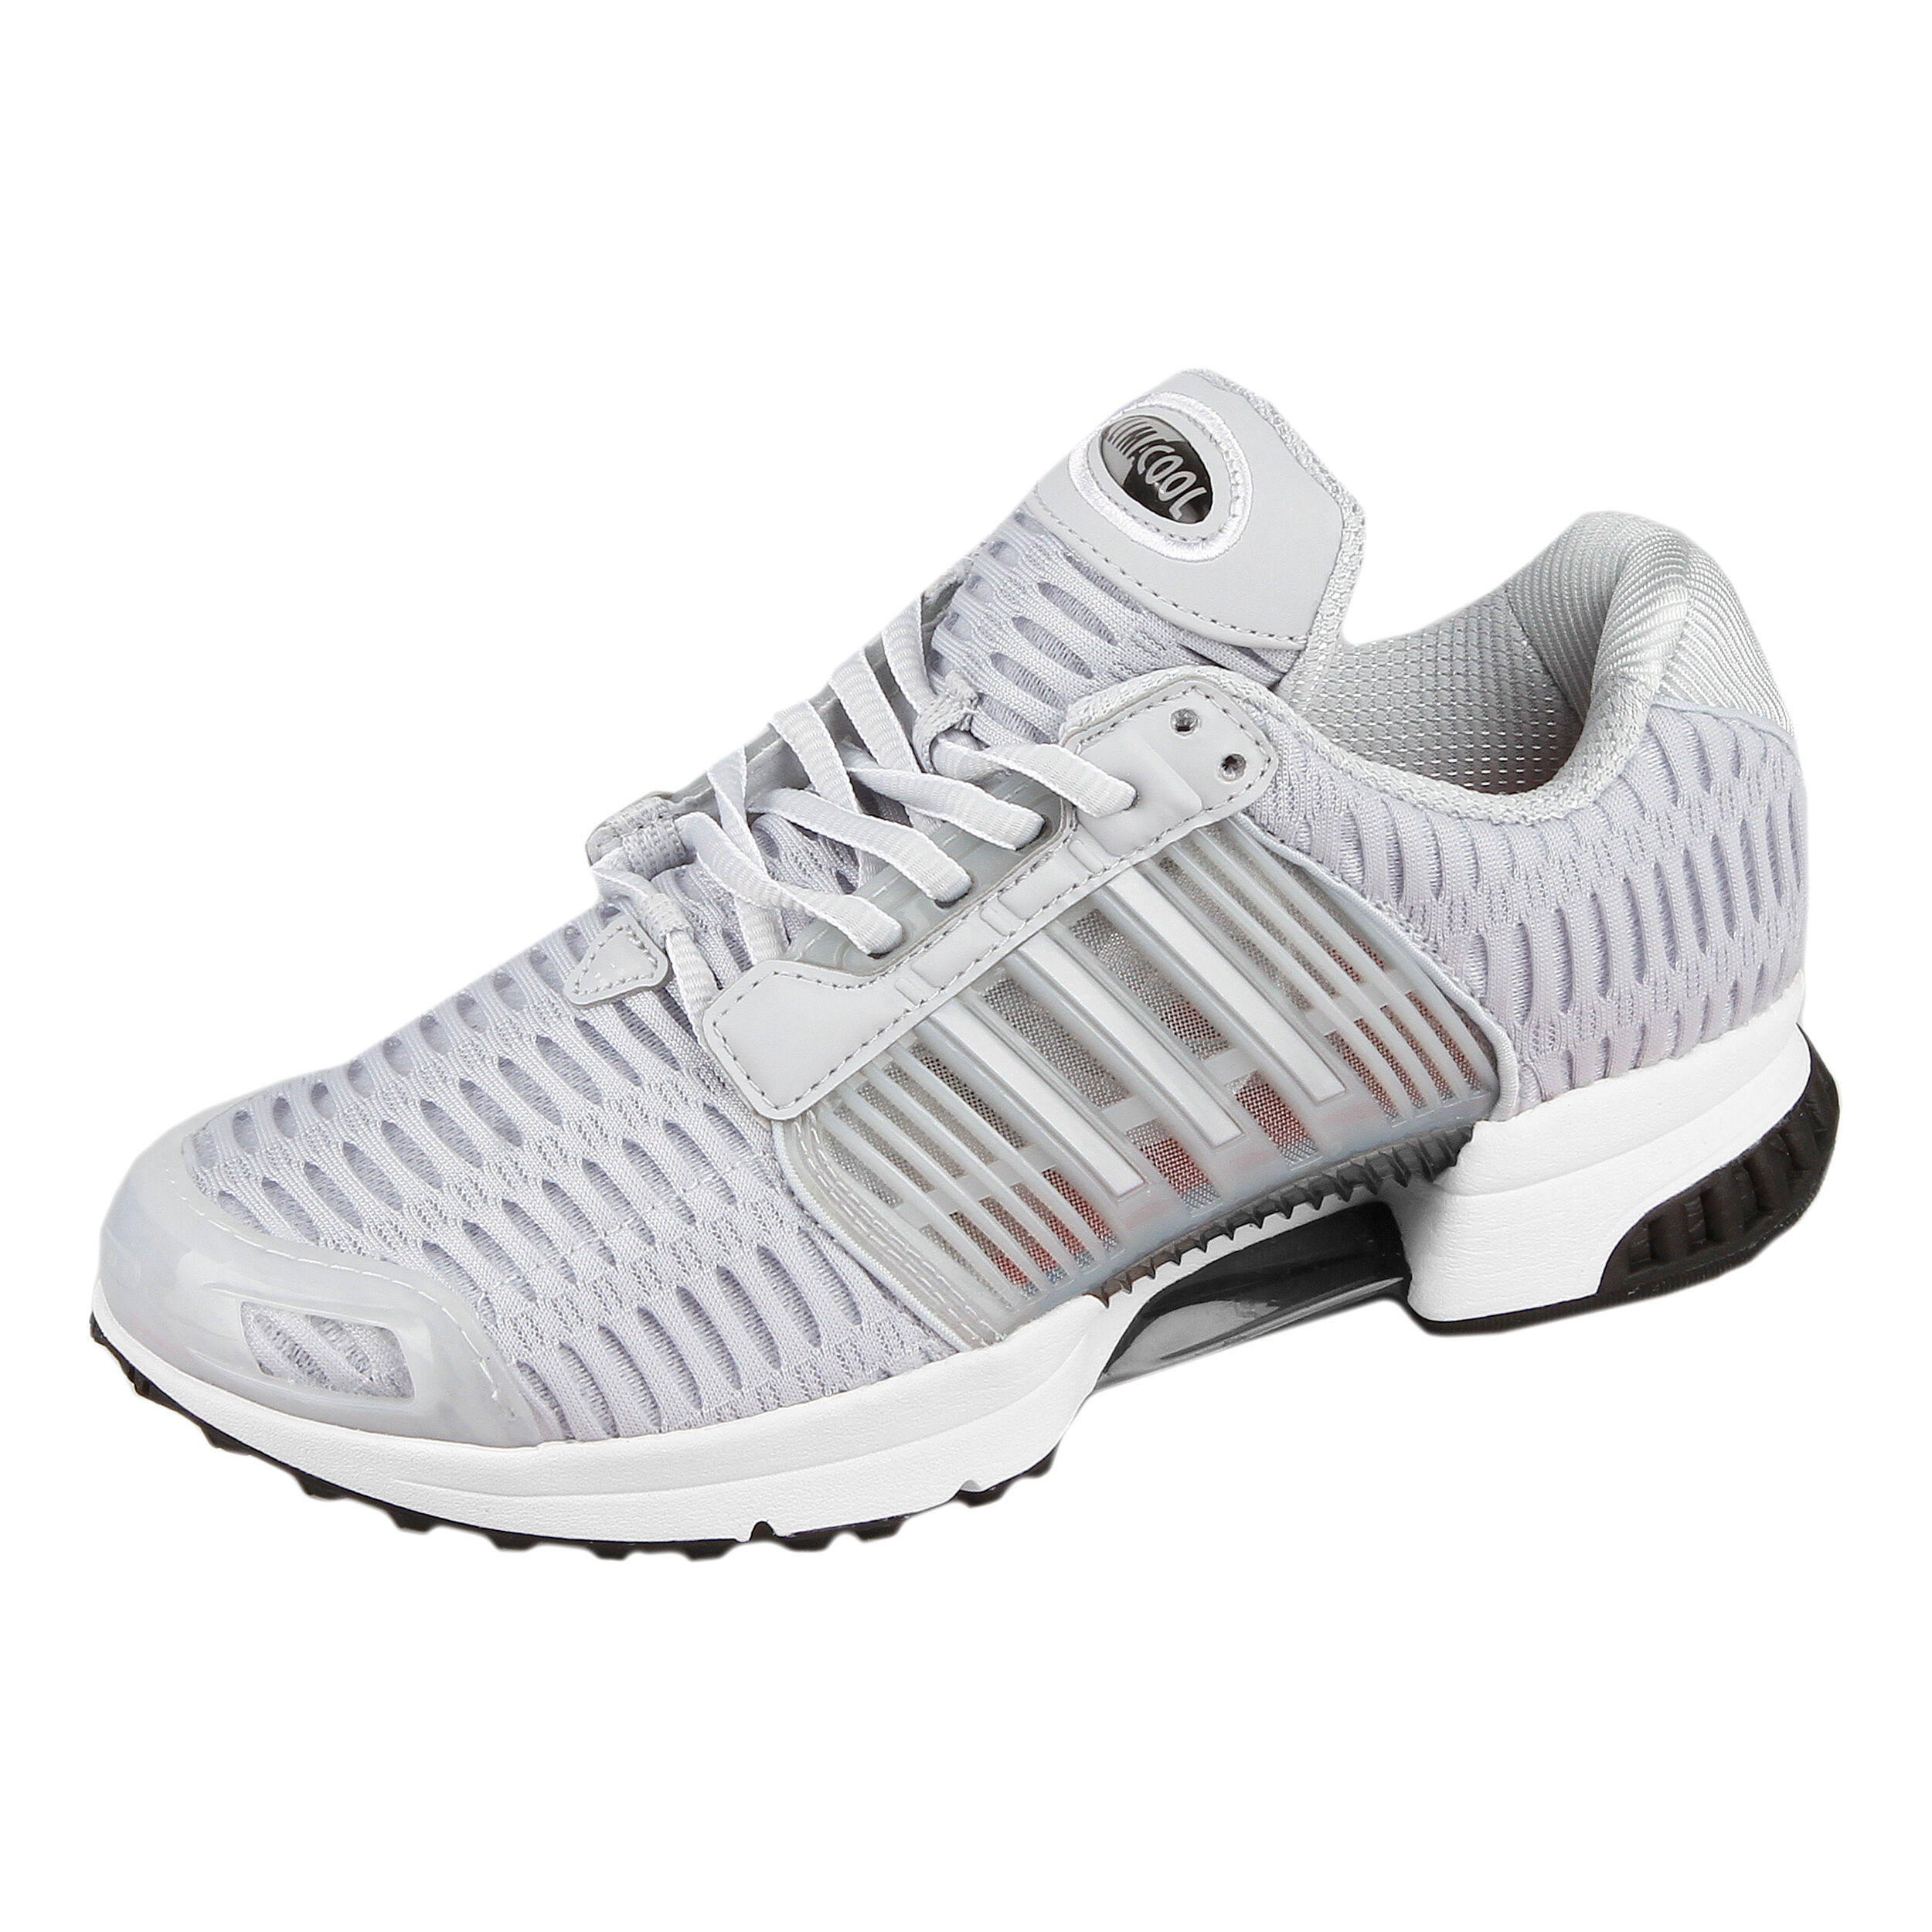 adidas climacool 5 shoes inches